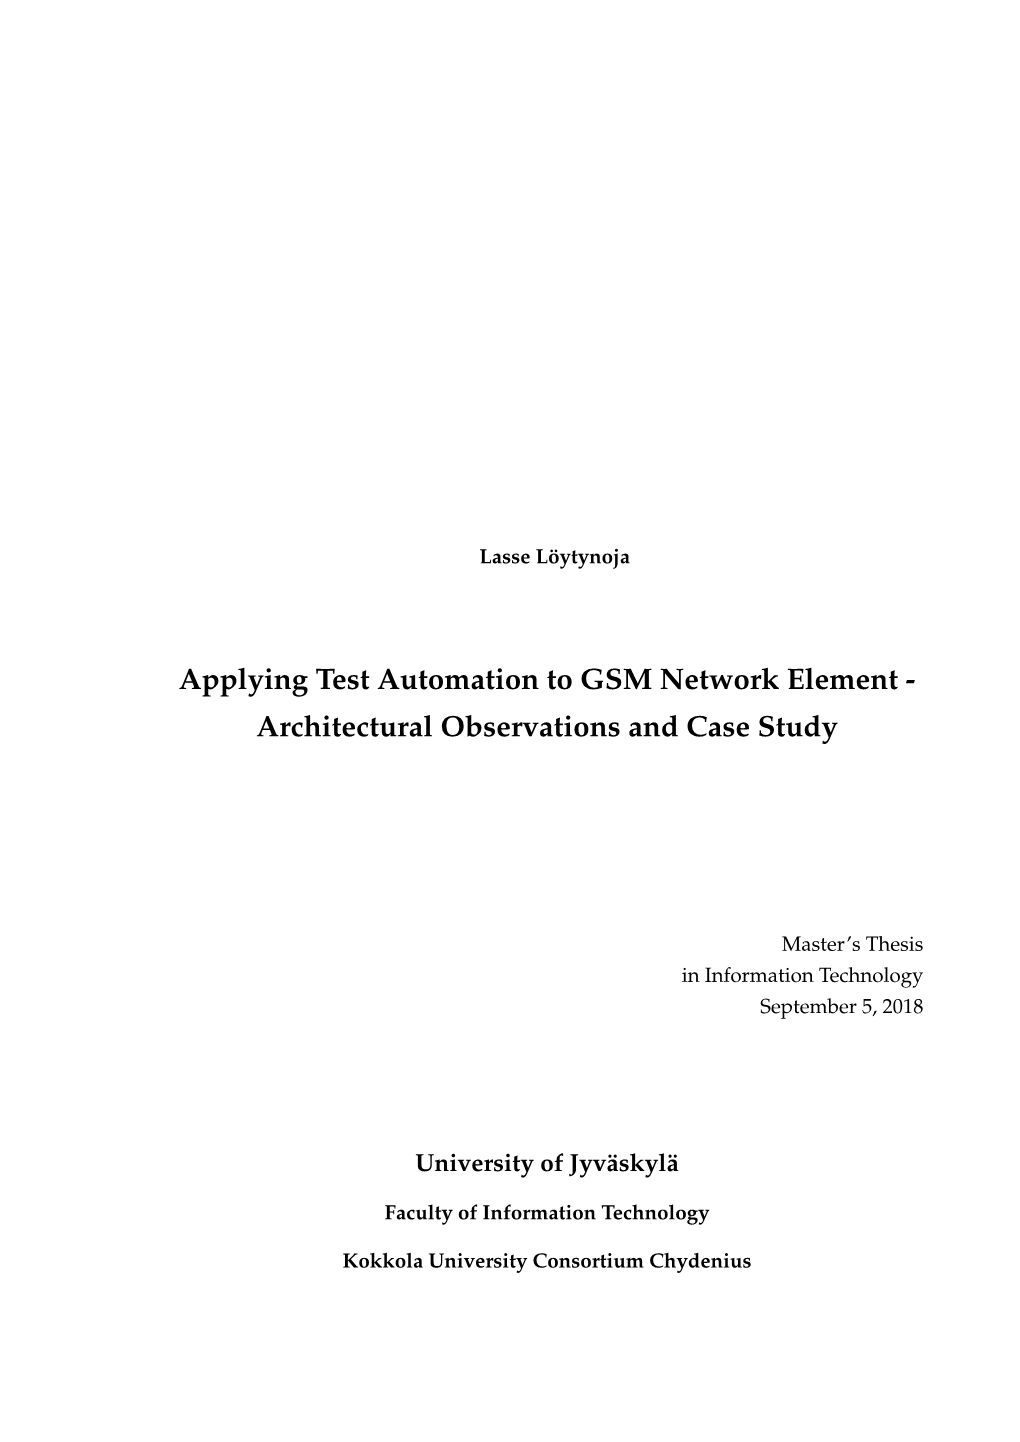 Applying Test Automation to GSM Network Element - Architectural Observations and Case Study